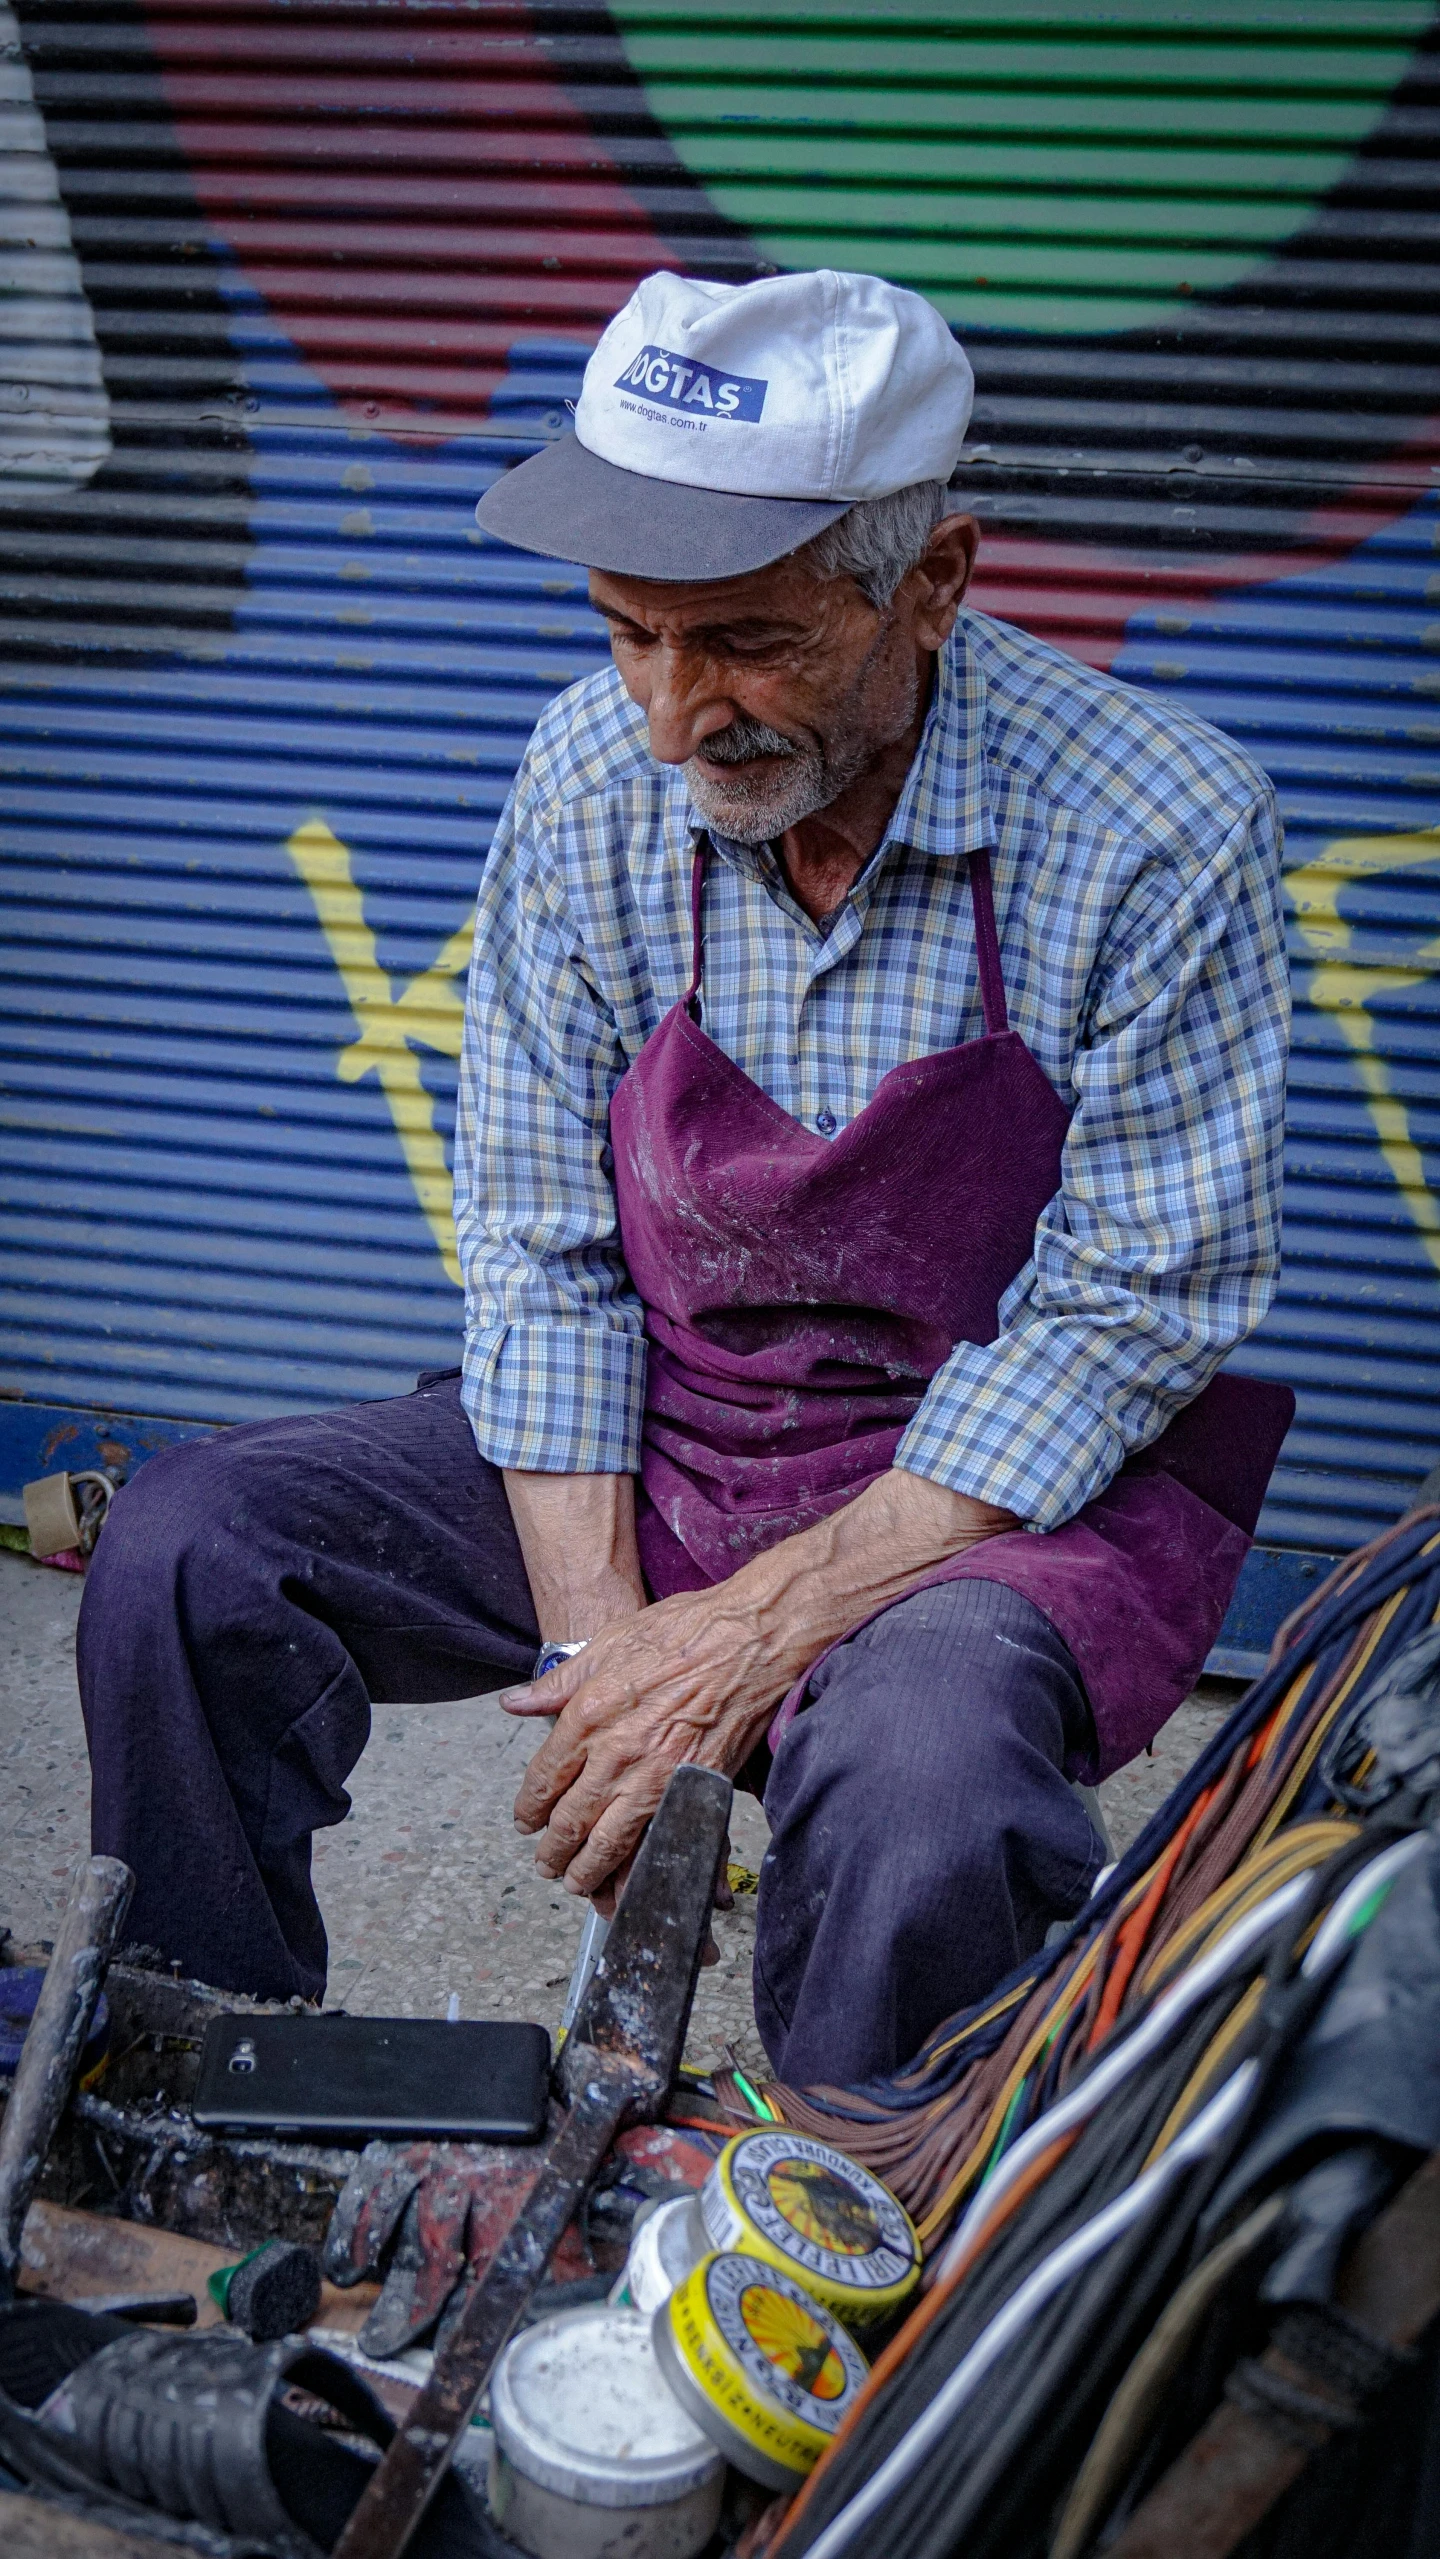 a man sitting on the ground working on his tools